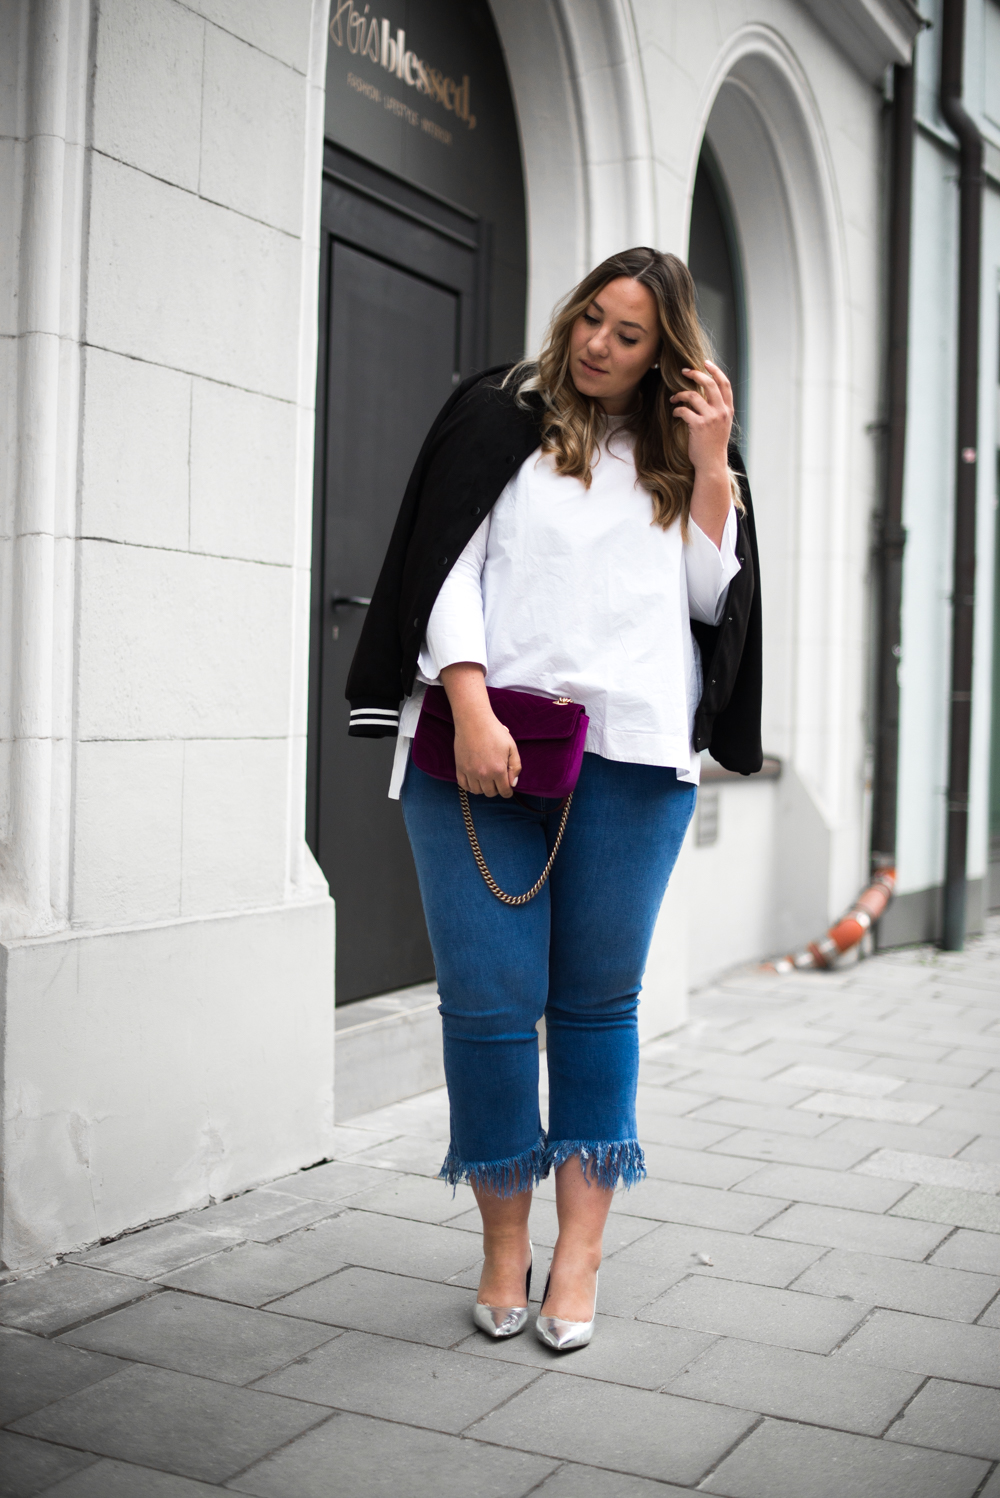 Gucci_The Skinny and the Curvy One_Ms wunderbar_Plus Size Blogger_curve blog_Fashionblog Deutschland_Plus Size Fashion Deutschland_College Jacke_Fringe Jeans (5 von 15)